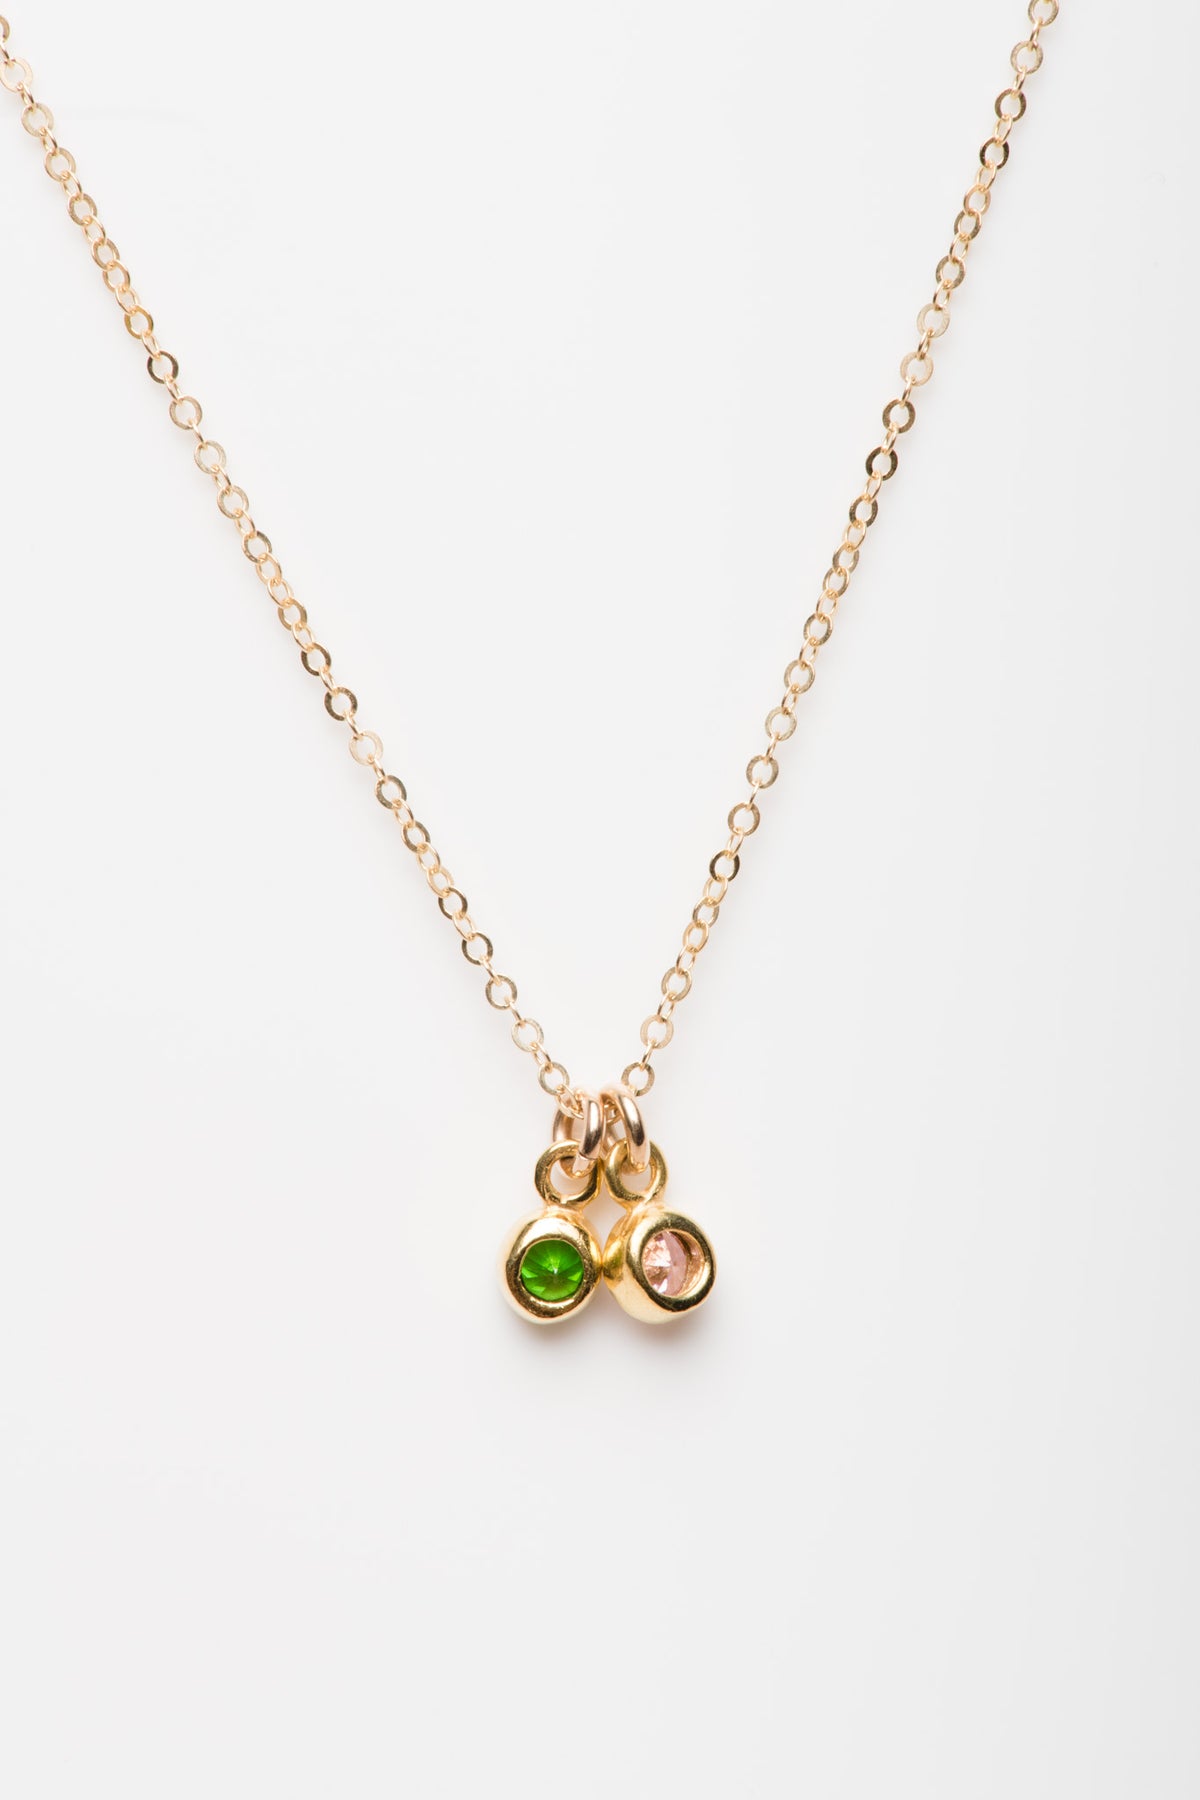 Able Legacy Birthstone Necklace